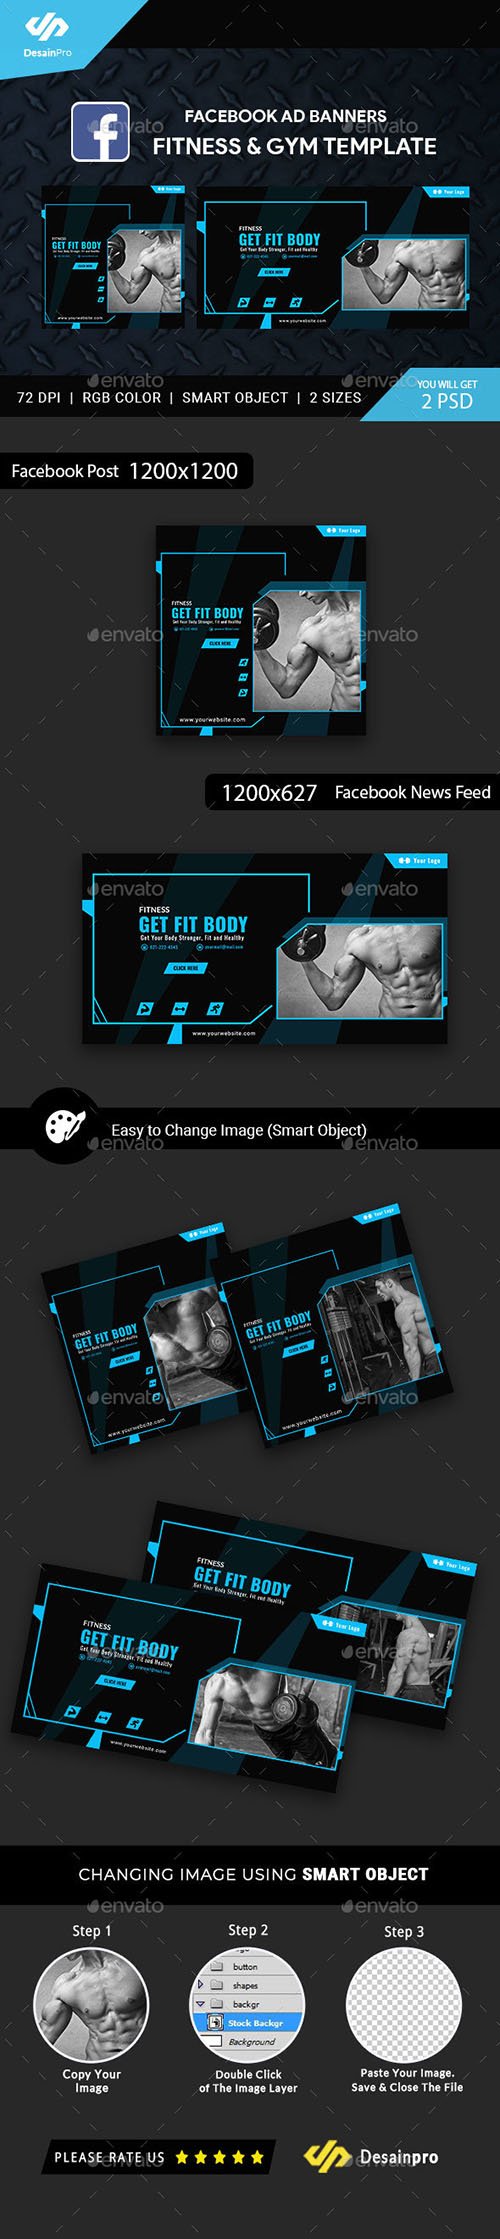 GR - Fitness and Gym Facebook Ad Banners - AR 21548685